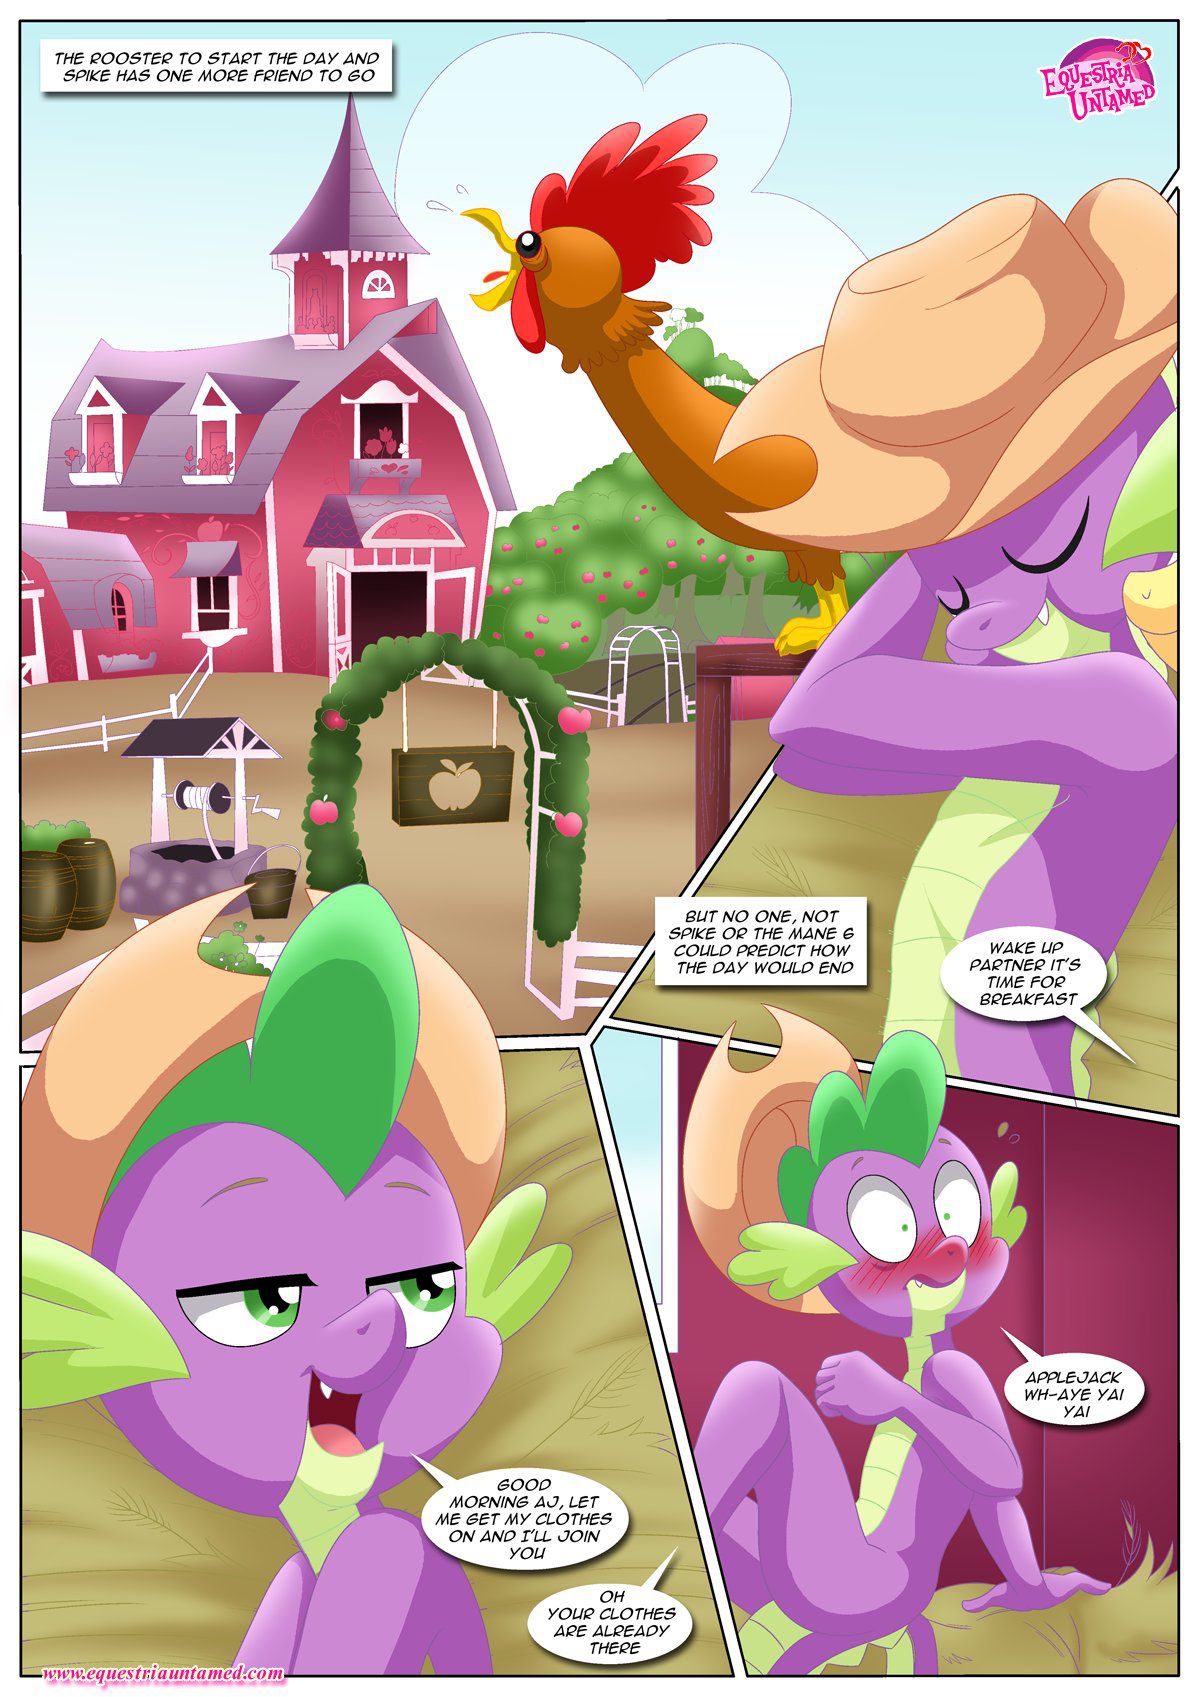 [Palcomix] Pinkie's Playhouse (My Little Pony Friendship Is Magic) [Ongoing] 2